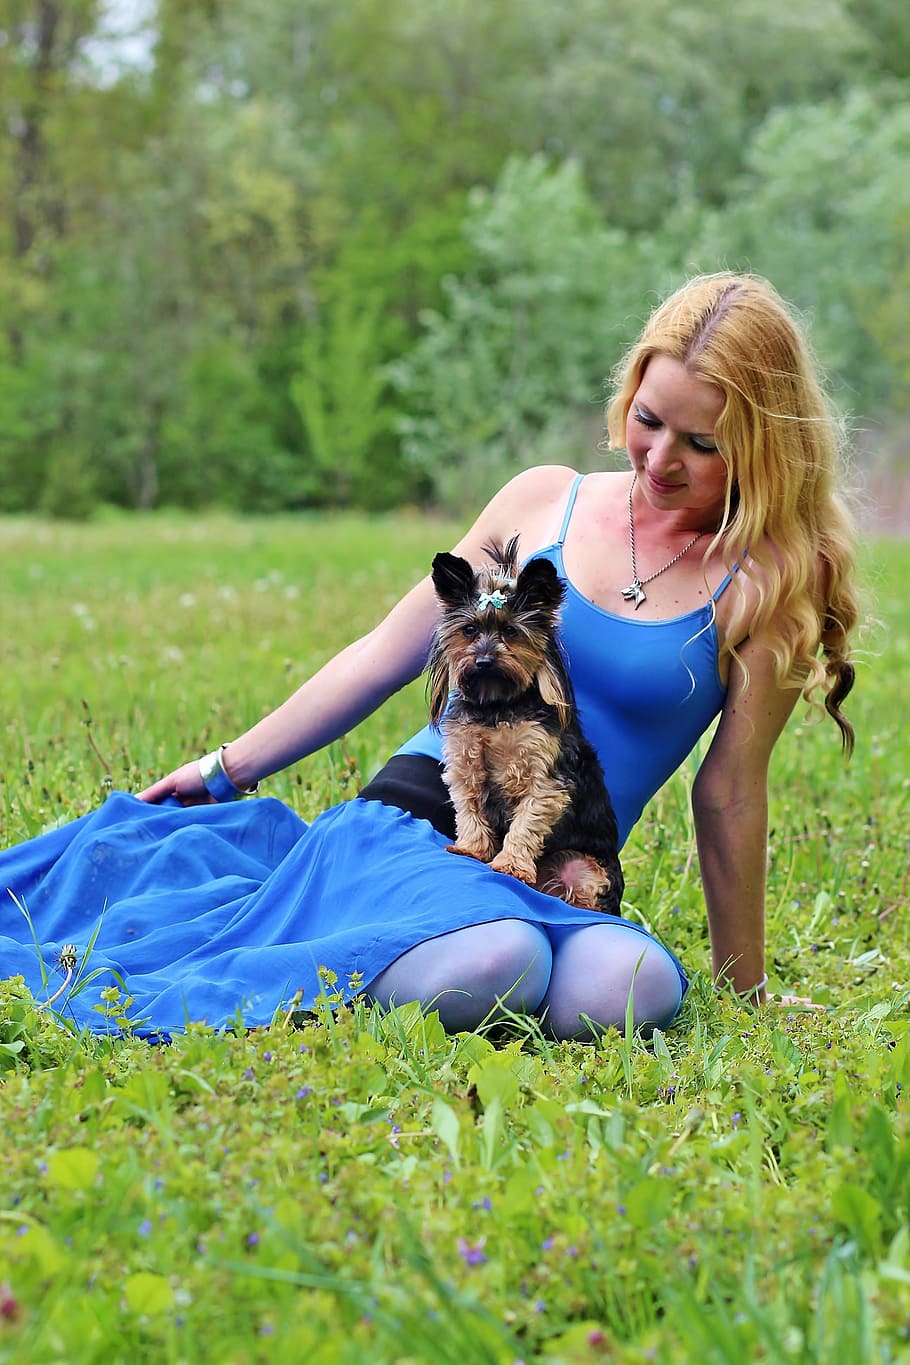 dogs, woman and dog, yorkie, blonde woman, lie, beauty, dream, green grass, spring, outdoors